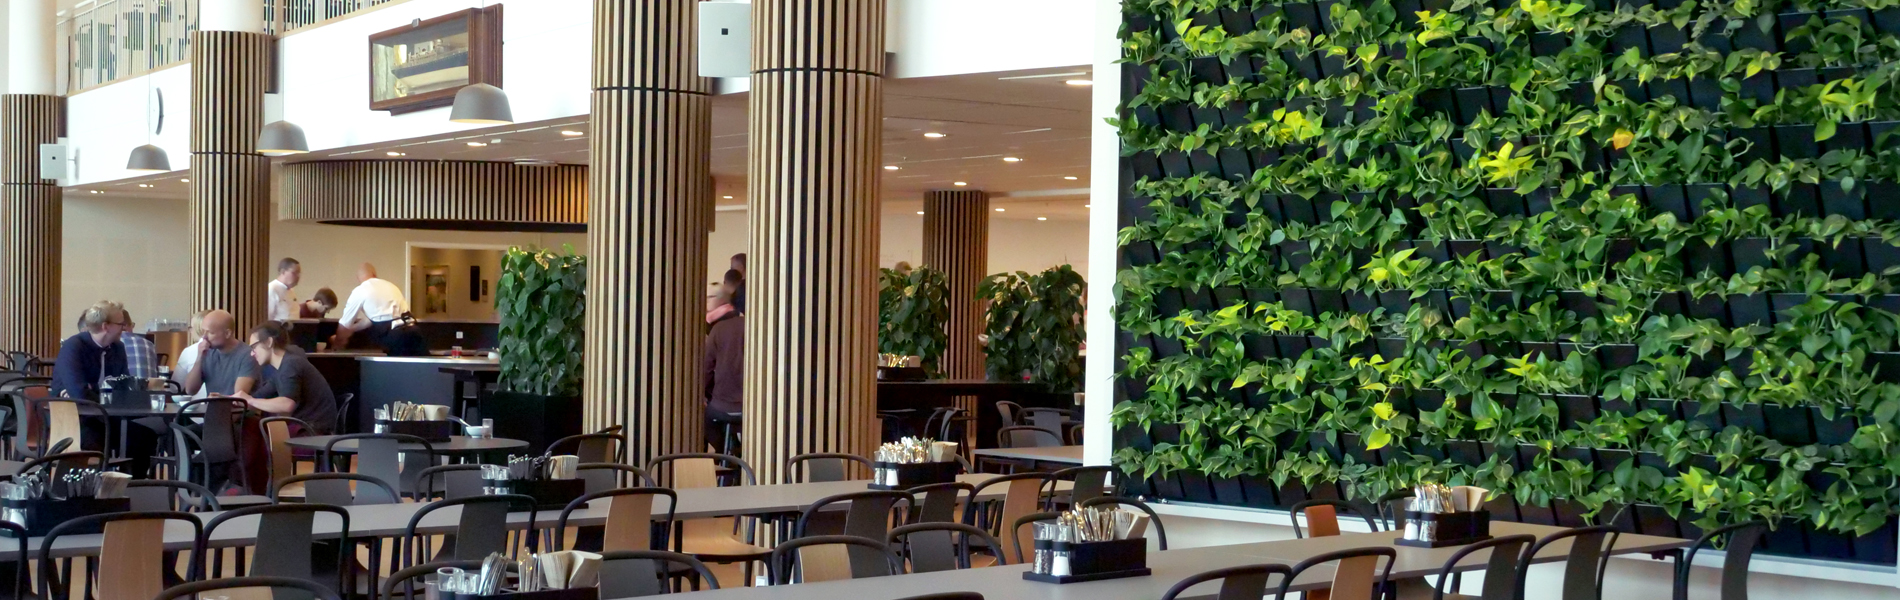 Restaurang with a green wall made of leafs | Coor 